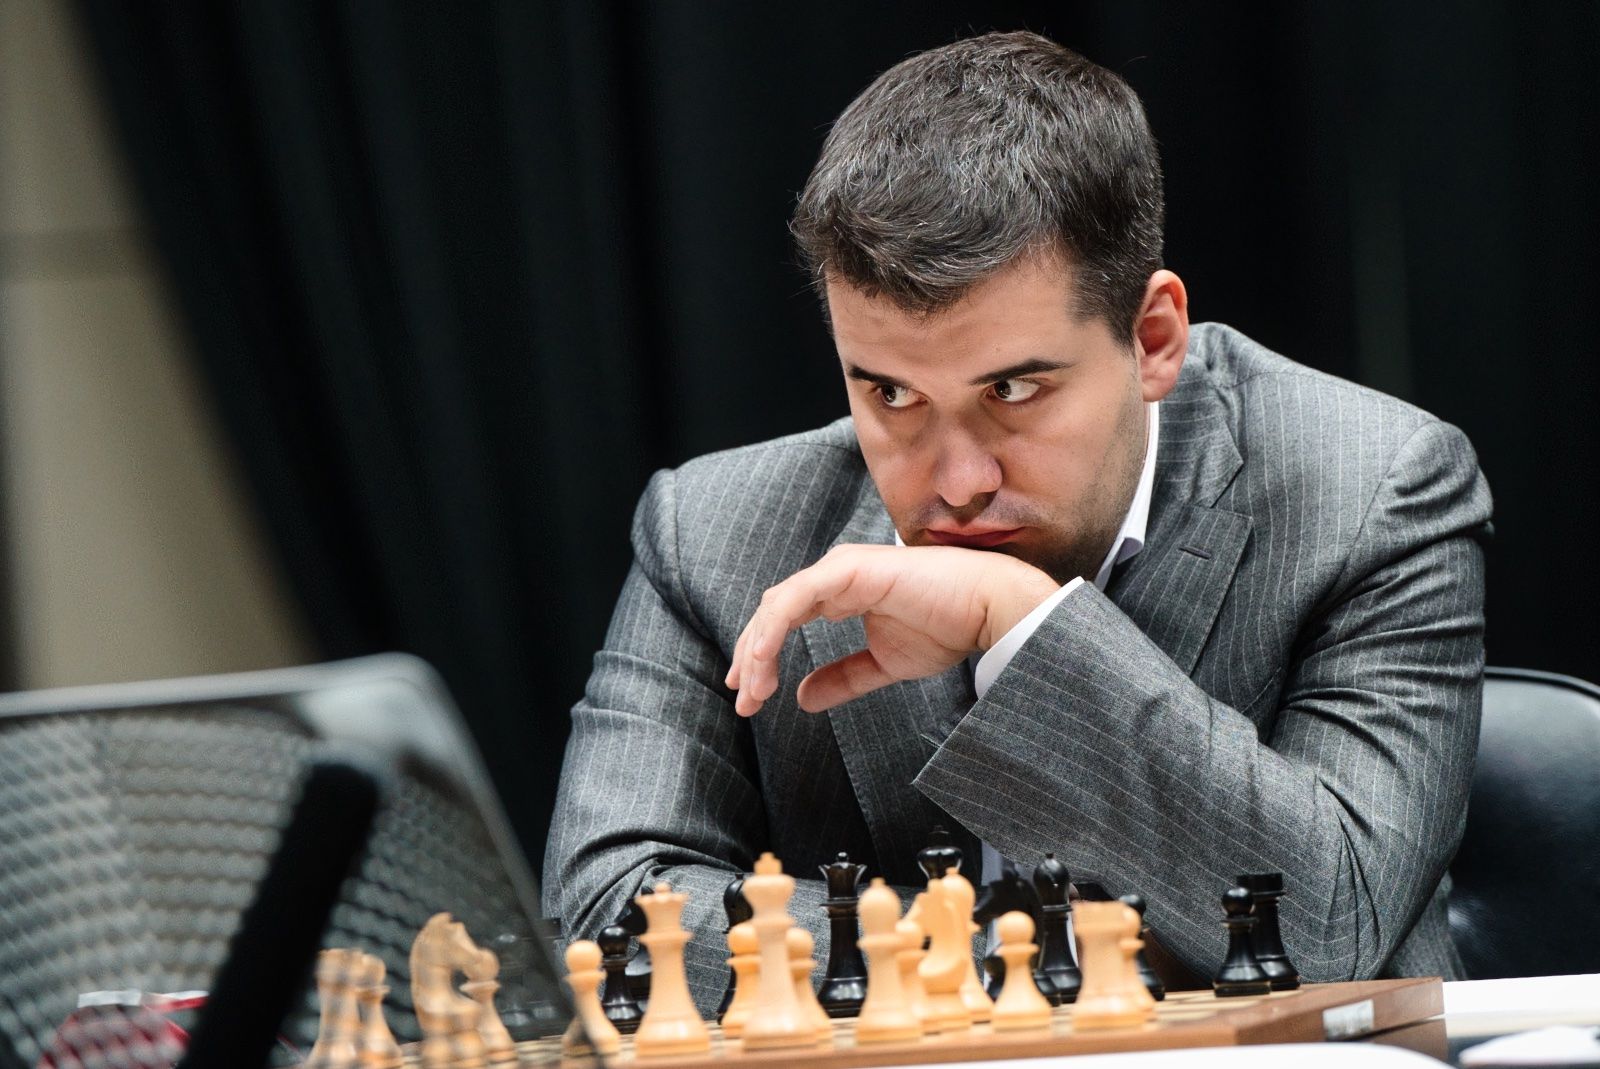 World Chess Championship 2023 Game 7 As It Happened: Ian Nepomniachtchi  forces Ding Liren to resign under time pressure